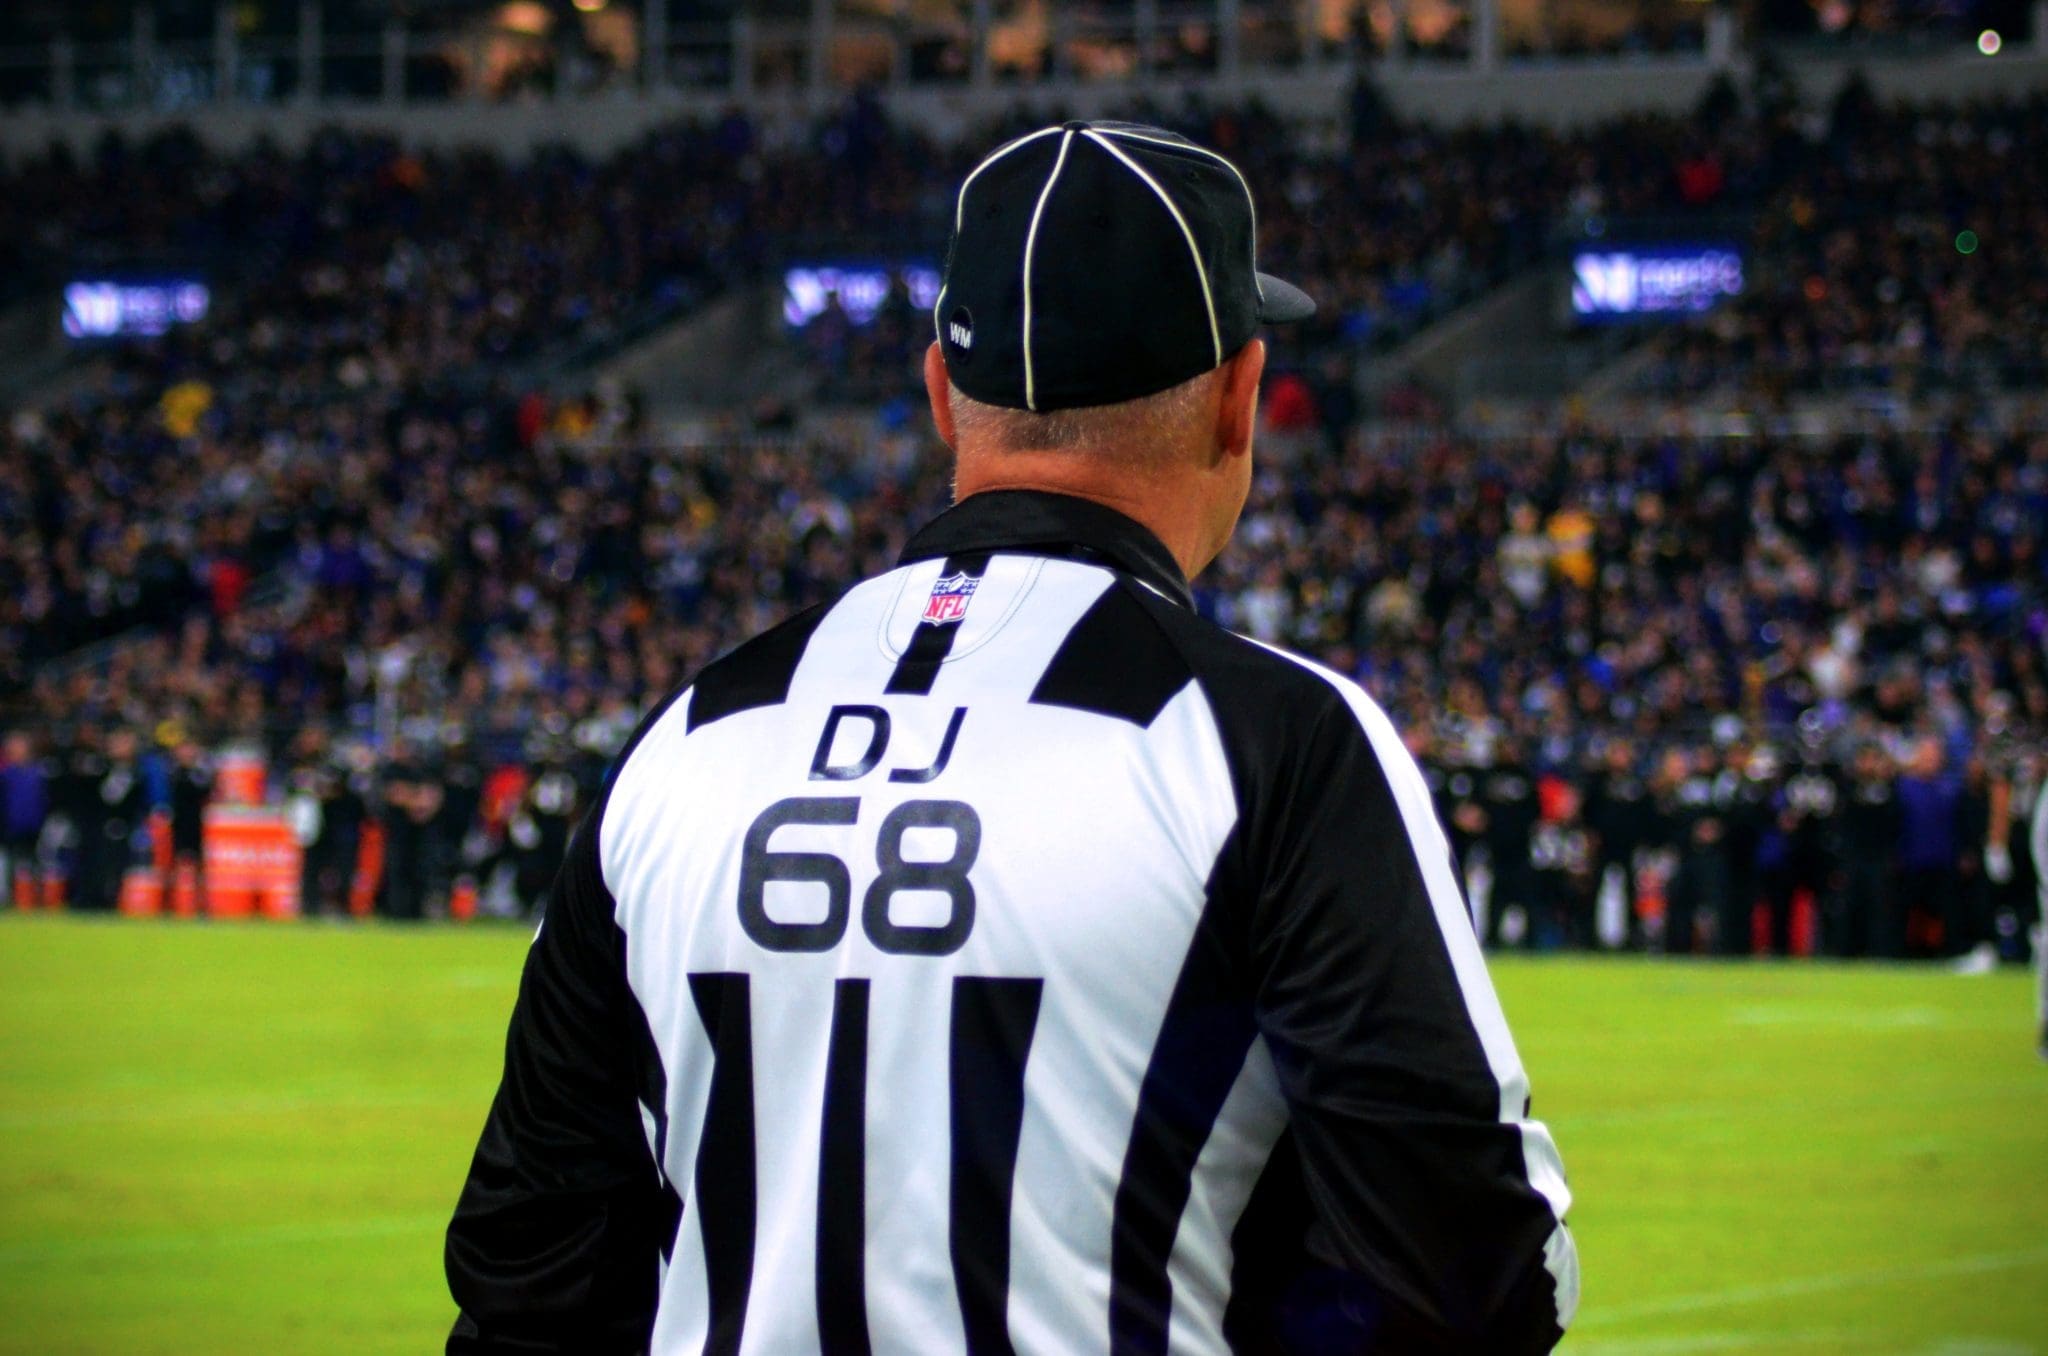 An NFL referee looks on as the Steelers face the Ravens on Jan. 1, 2022 in Baltimore. (Mitchell Northam / Steelers Now)